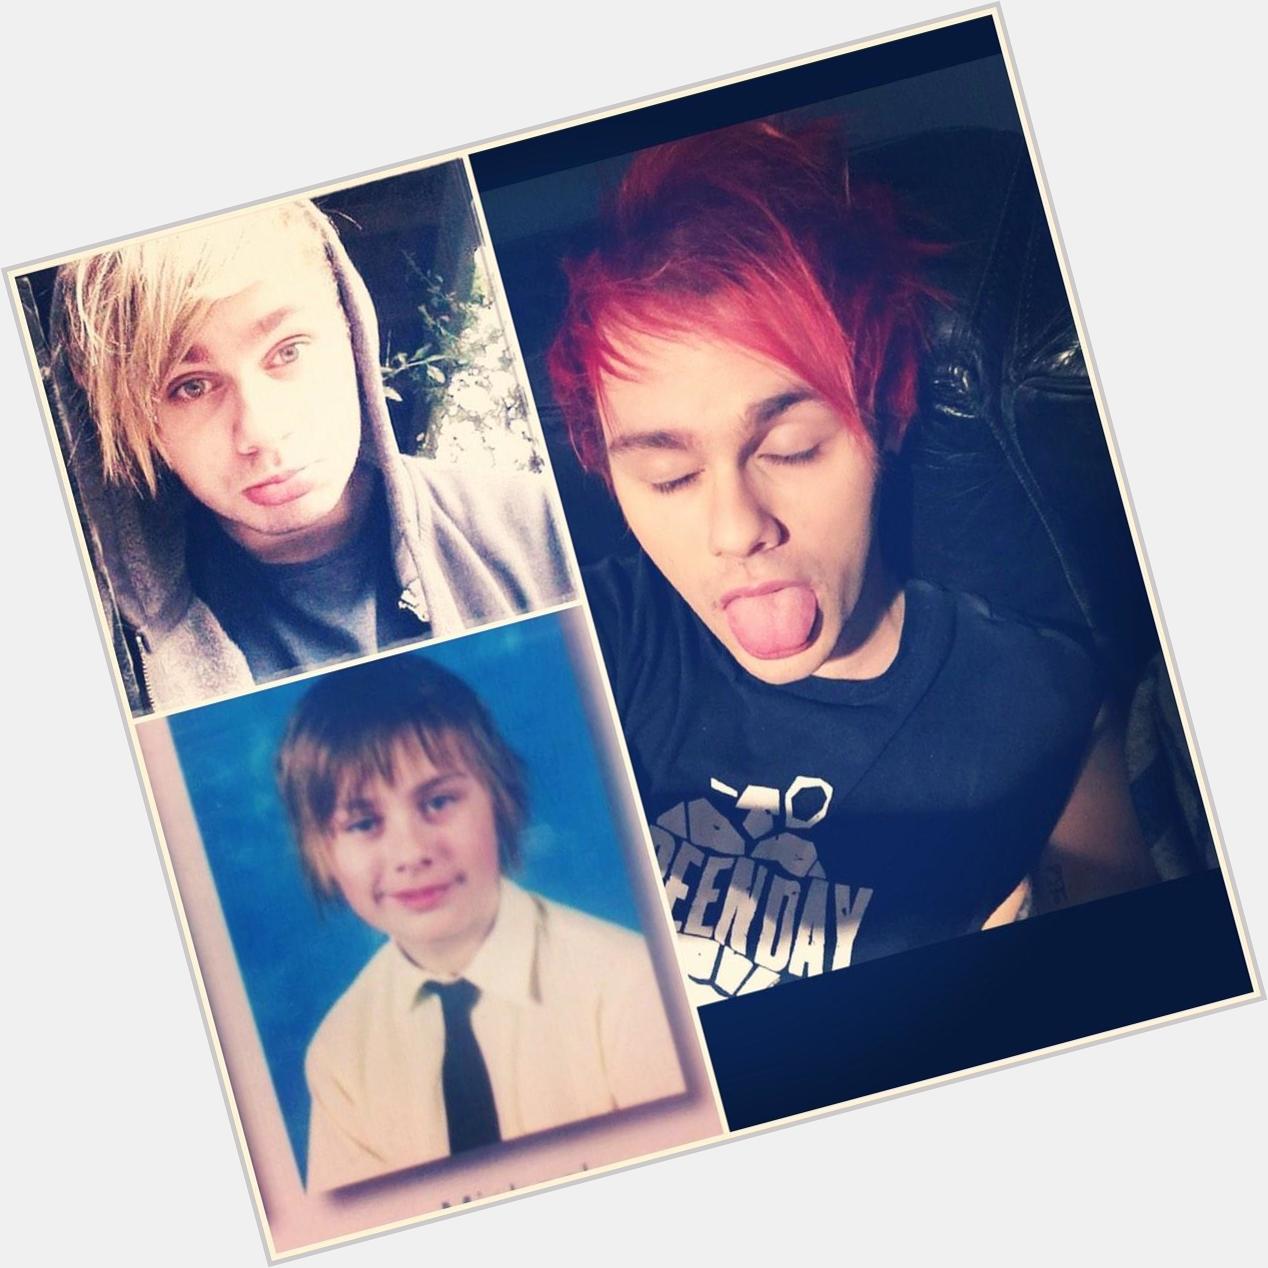 Happy birthday Michael Gordon Clifford! ILYSM, hope you have a awesome day cause you deserve it!  